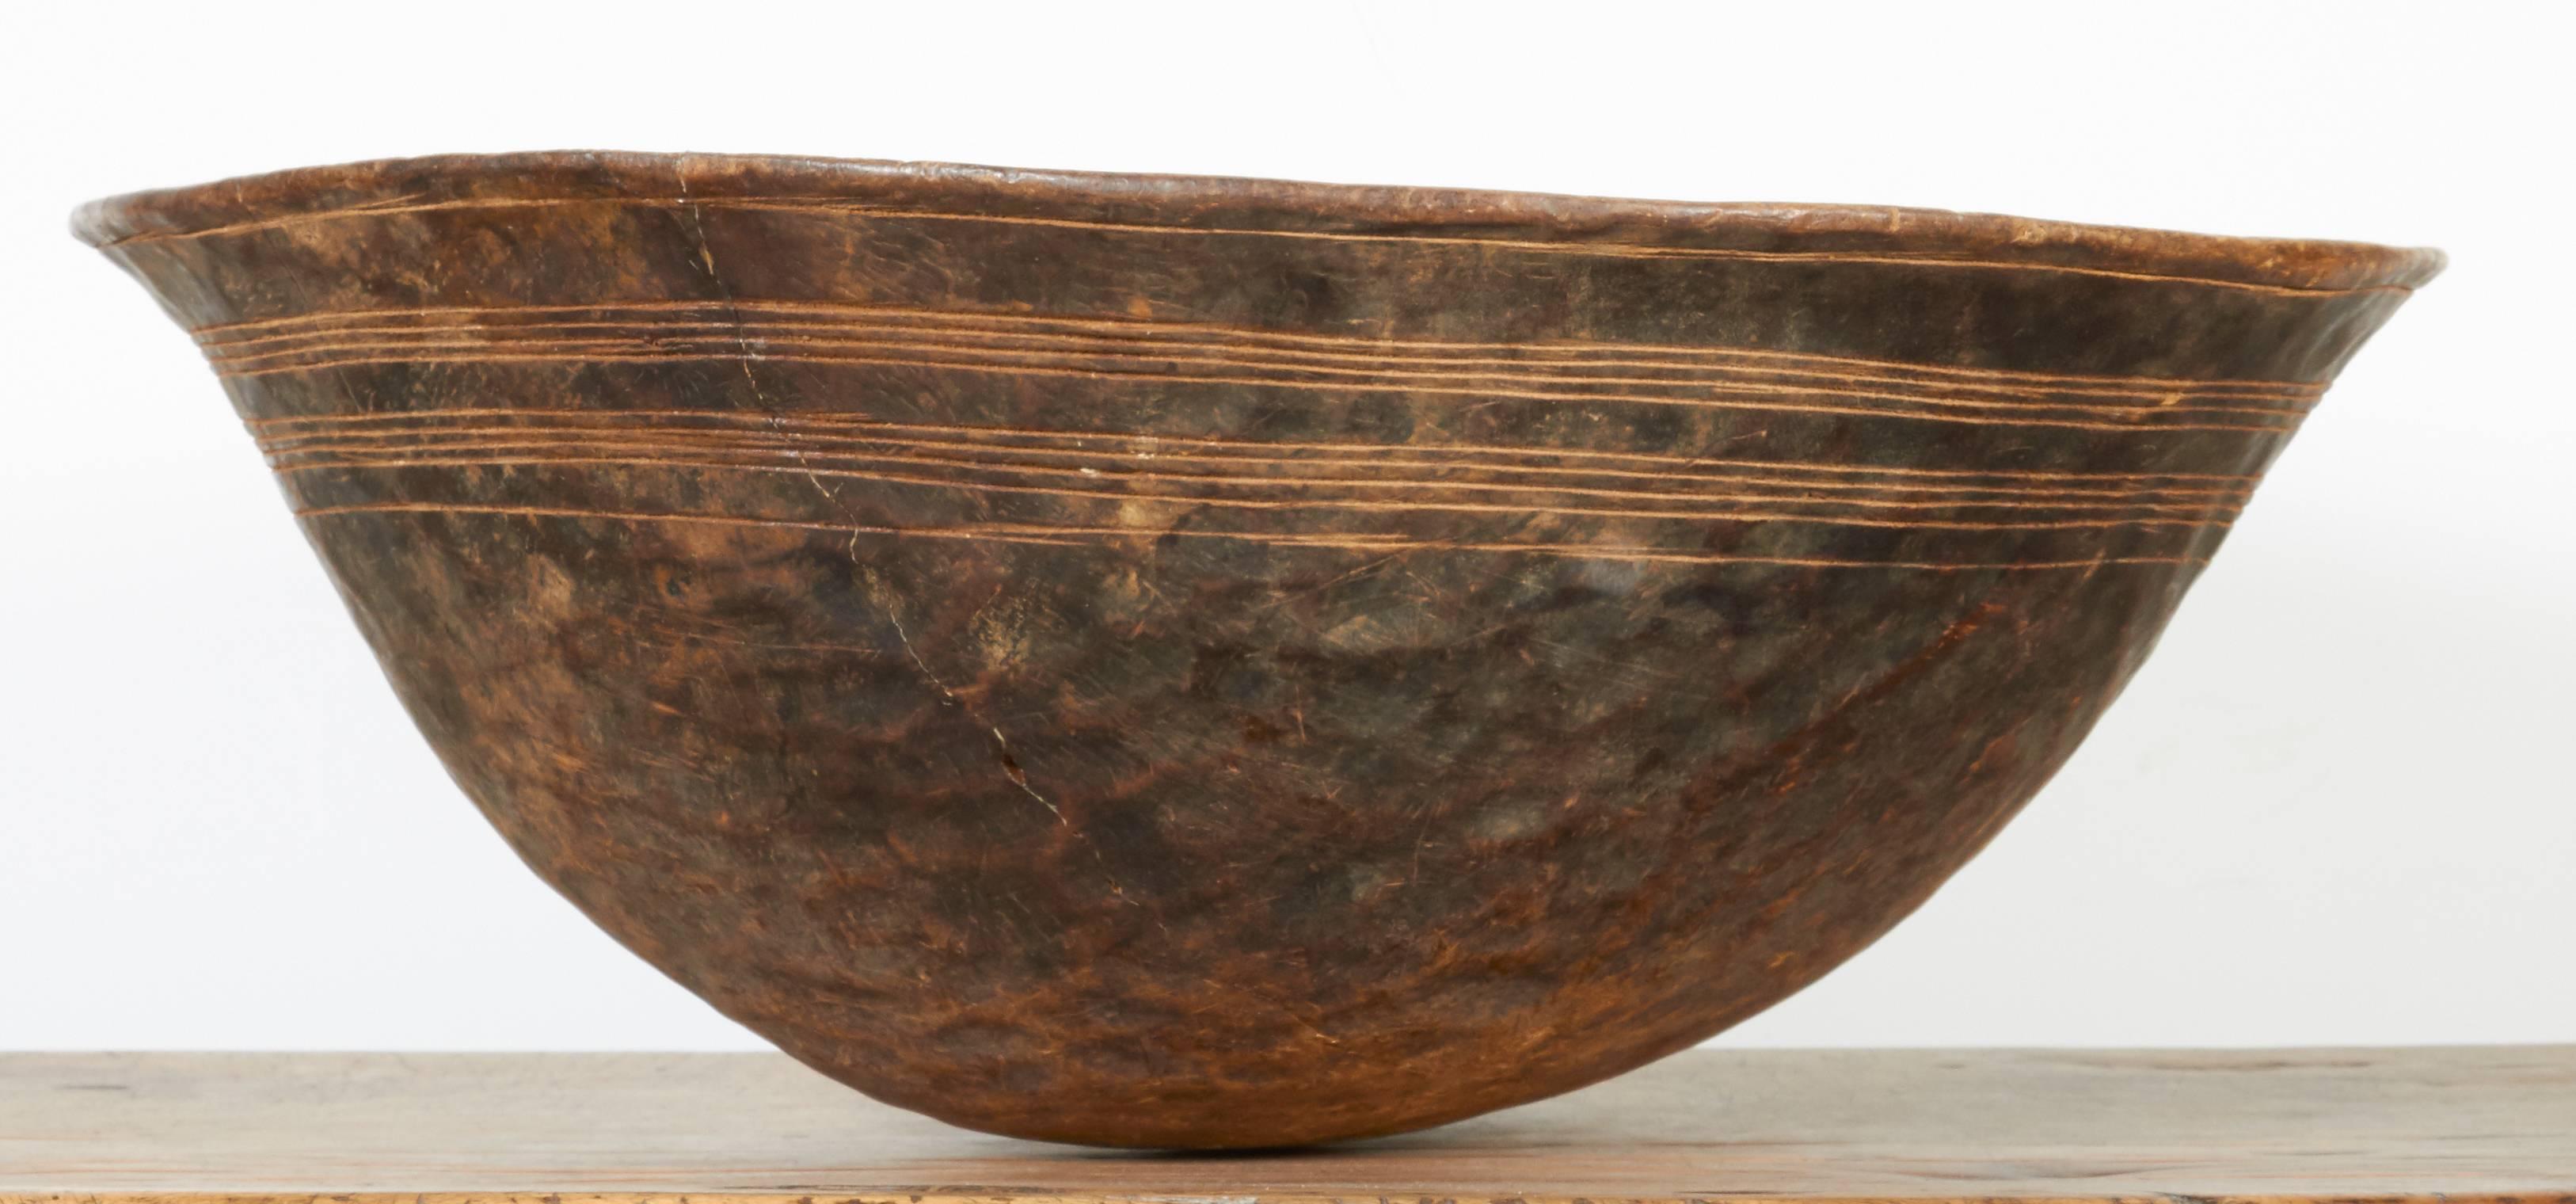 A Classic, gracefully shaped West African food bowl created from a single piece of wood with very simple carved decoration and gorgeous patina showing it's decades of use. 
BT395.